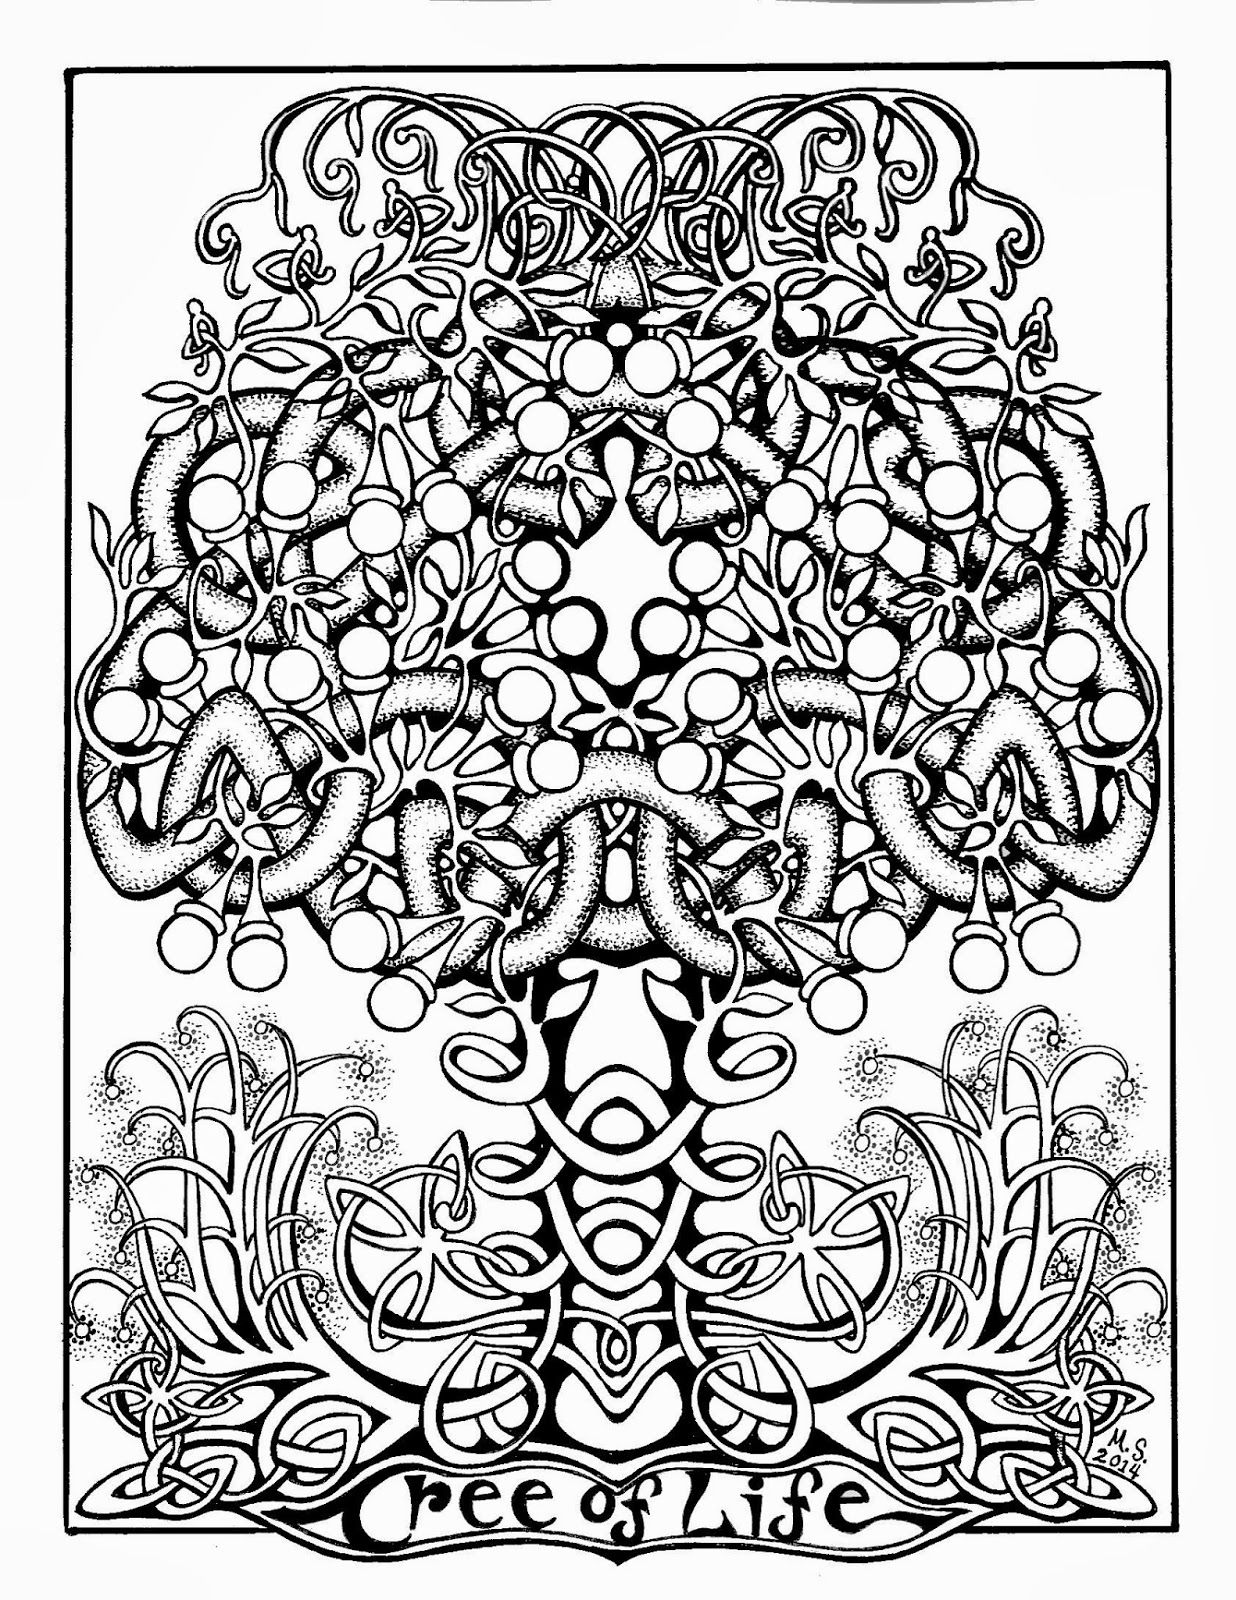 Butterfly Tree Coloring Page - Coloring Pages For All Ages